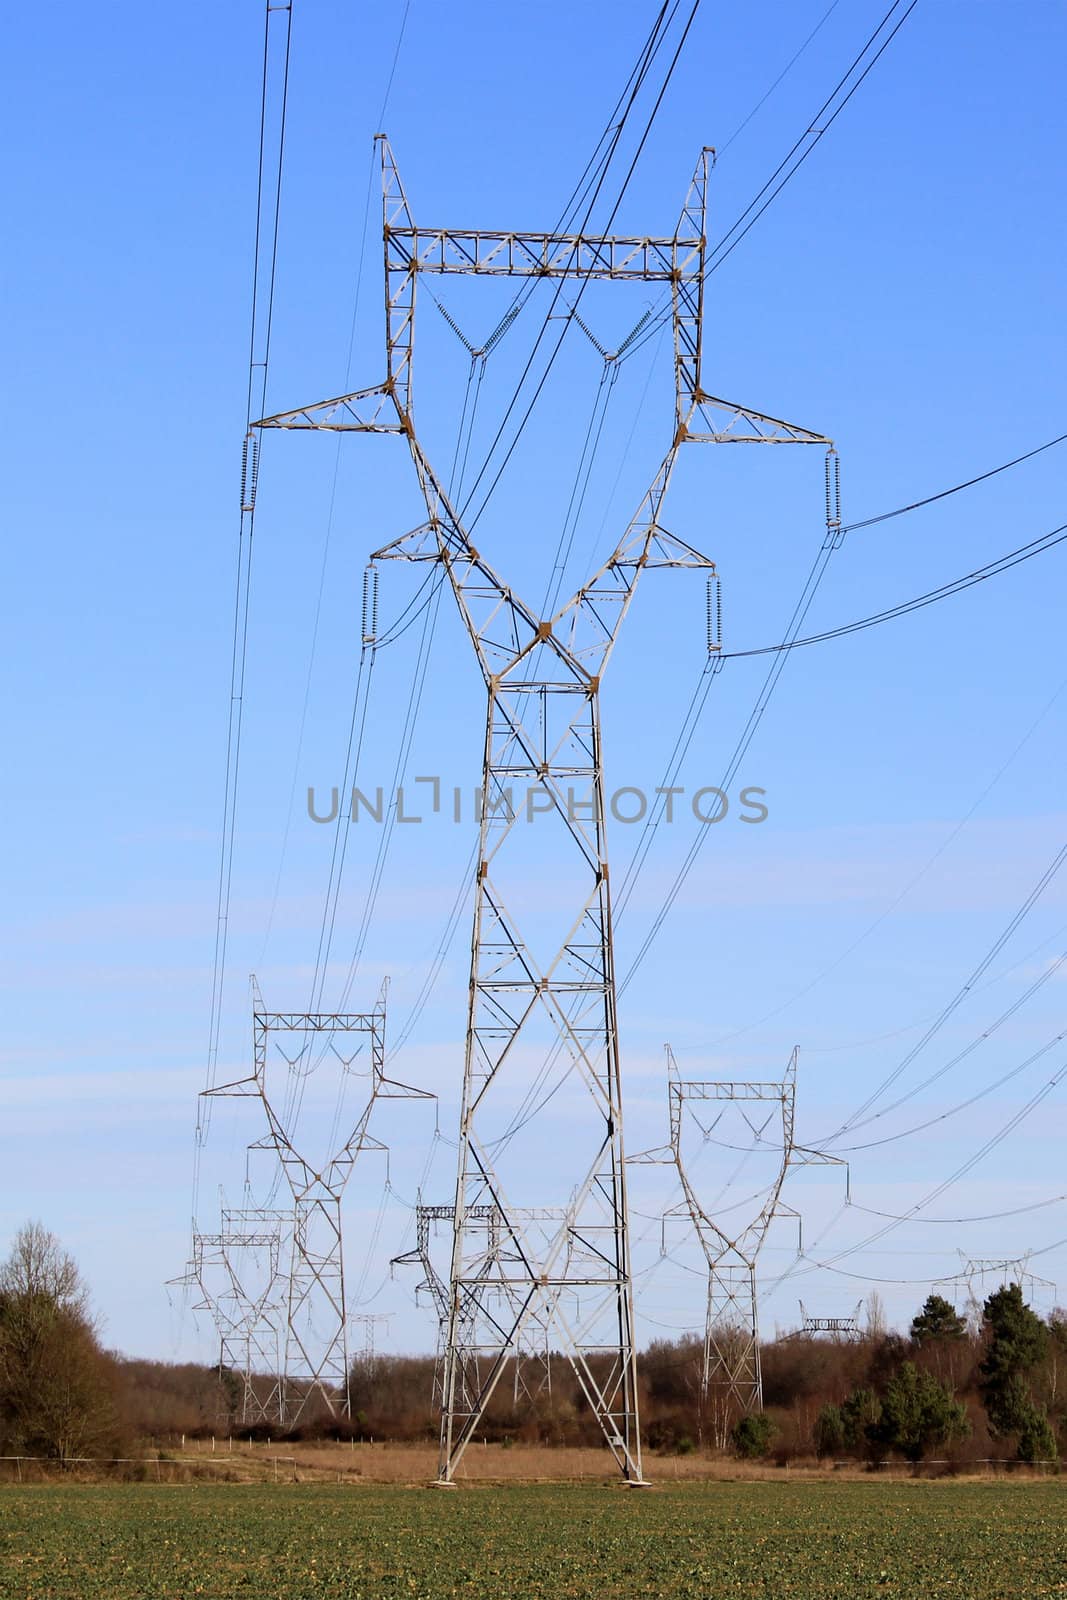 A row of electricity pylons in a field for a nuclear power